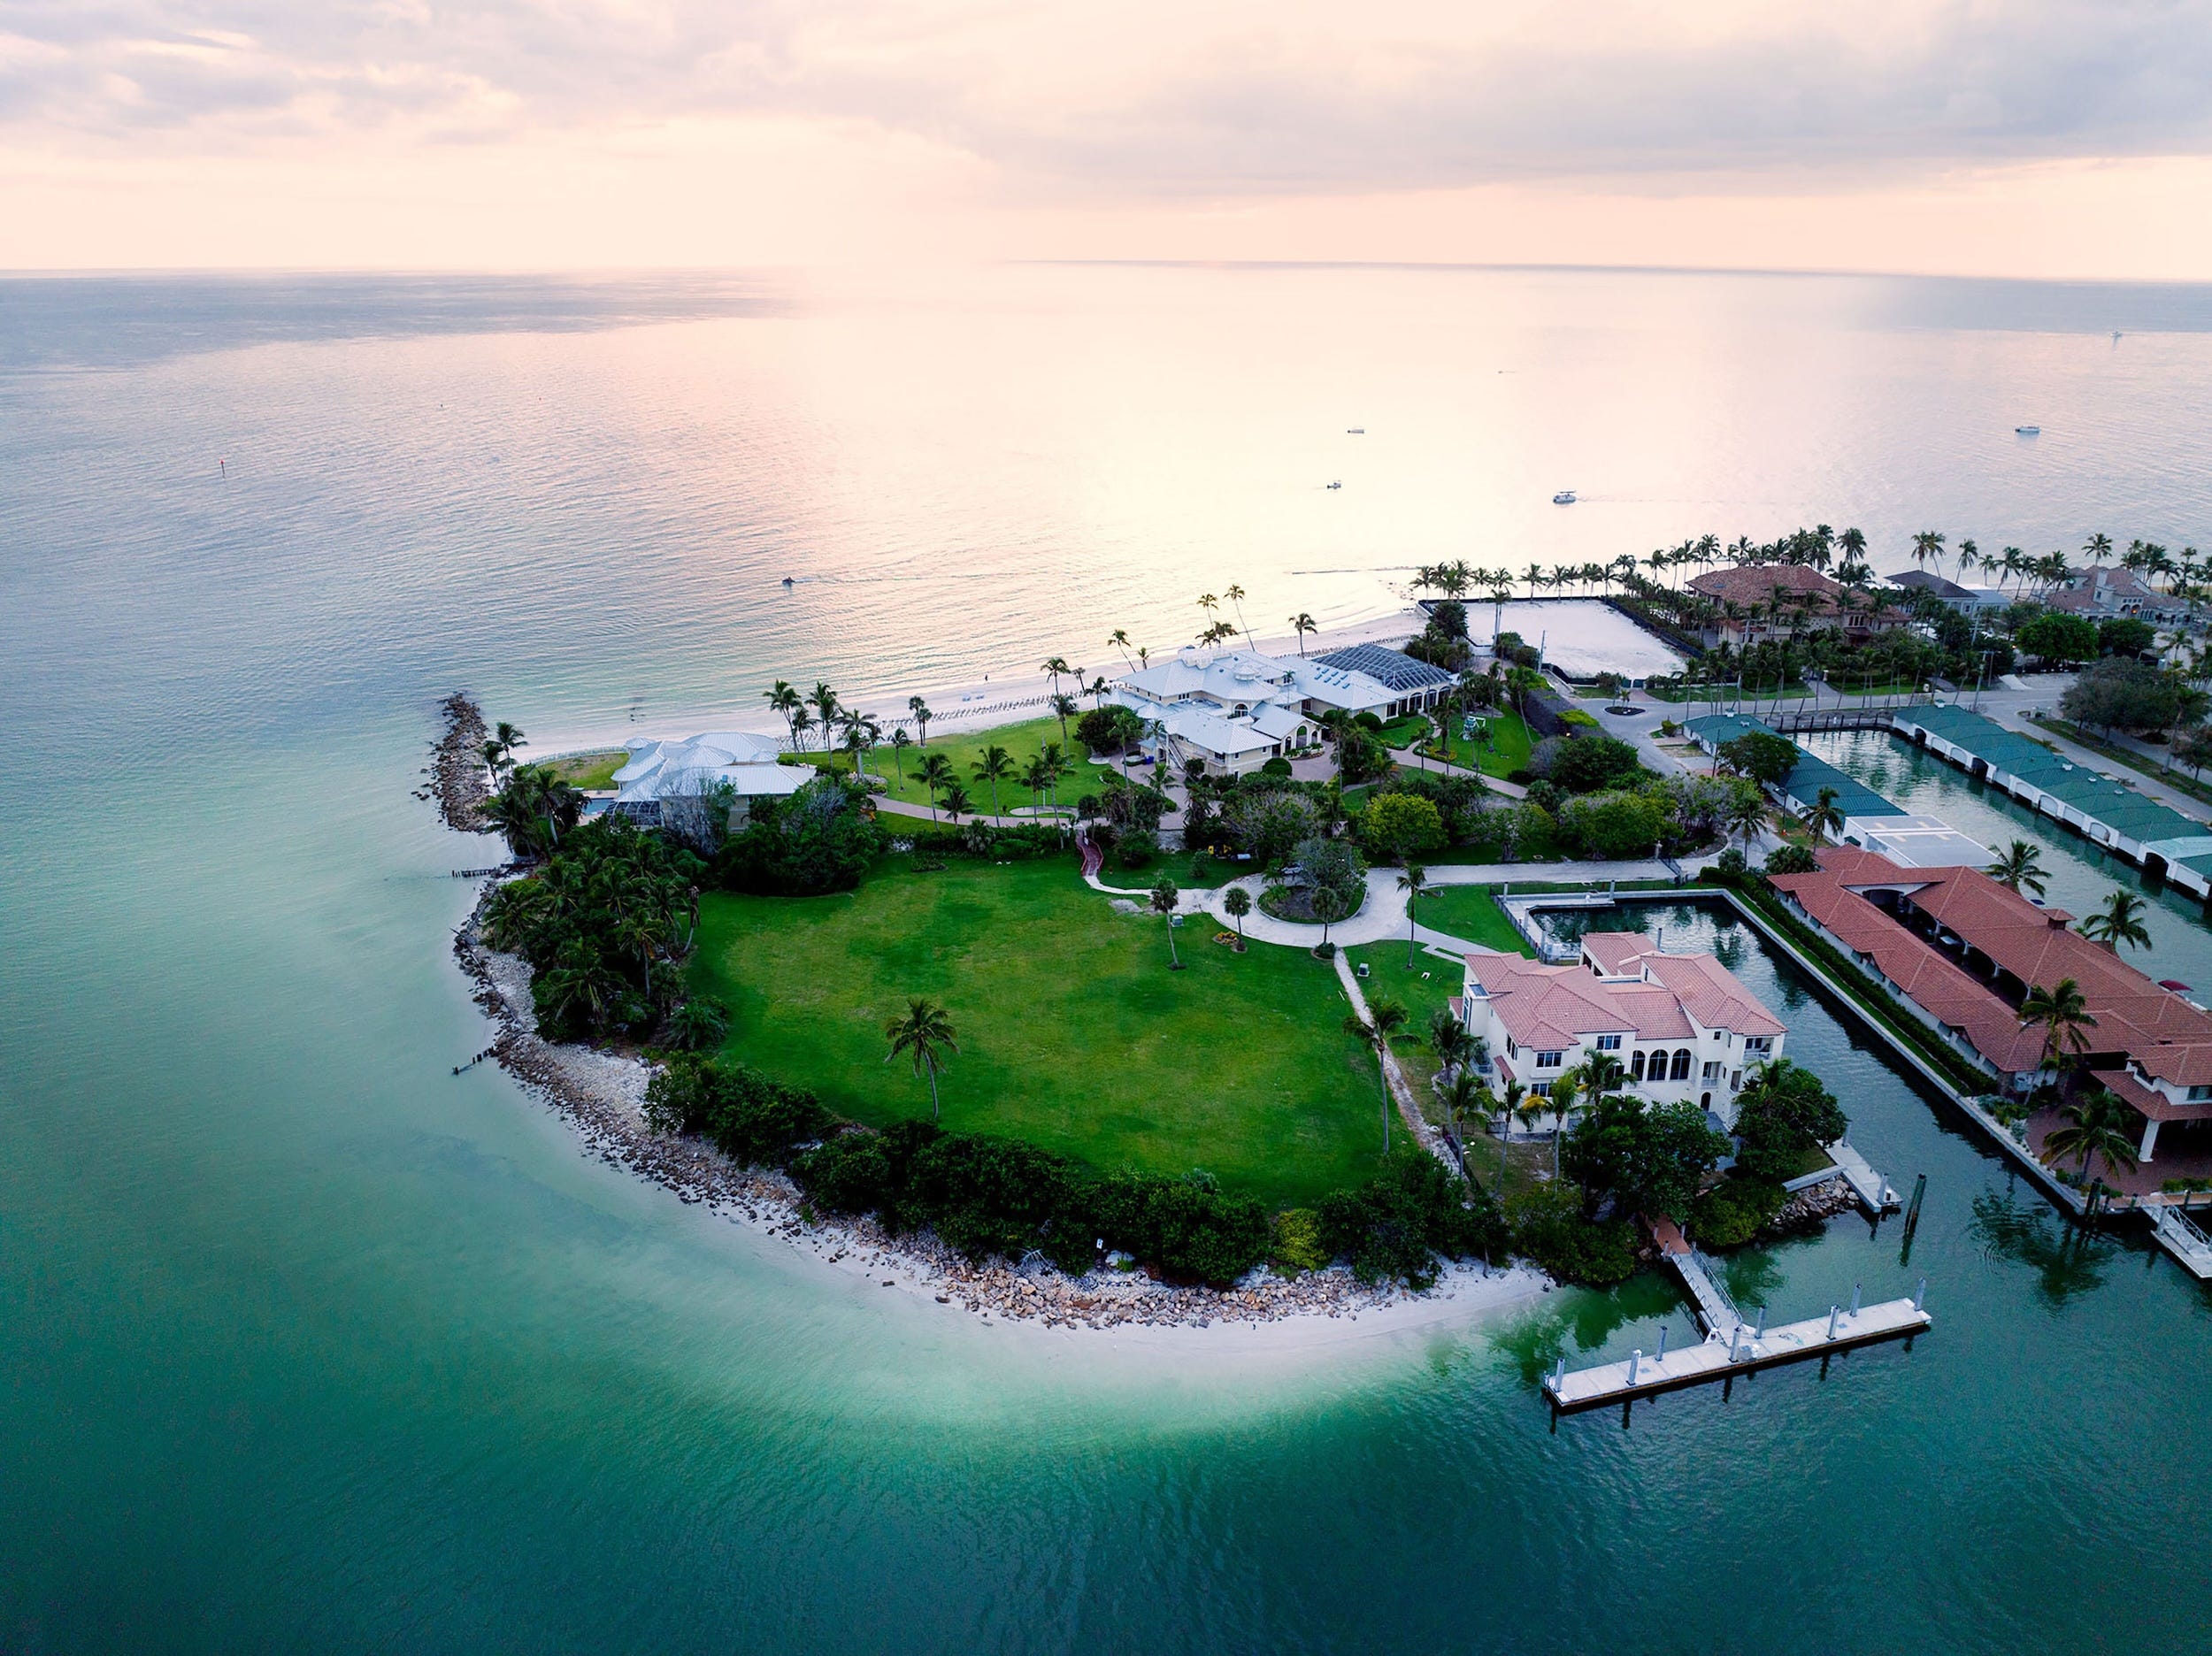 <ul class="summary-list"><li>A compound in Naples, Florida,  is on the market for a potentially record-setting $295 million.</li><li>Late financier John Donahue spent $1 million for land on the Gulf of Mexico in 1985, then added to it.</li><li>His family is ready to let go of three mansions on 9 beachfront acres — take a look around.</li></ul><p>A family compound in Naples, Florida, just hit the market for $295 million. </p><p>If it sells for even close to that amount, it would be the most expensive residential sale in the US.</p><p>The family of late investing magnate John Donahue is selling three waterfront houses on nearly 9 acres that come with a private 231-foot basin for yachts. </p><p>The compound in the now-posh Naples neighborhood of Port Royal had relatively humble origins. Donahue purchased a 4.3-acre parcel of land on the Gulf of Mexico for $1 million in 1985, <a href="https://www.wsj.com/real-estate/luxury-homes/americas-most-expensive-home-for-sale-naples-florida-81535a6b?mod=hp_lead_pos9">according to the Wall Street Journal</a>, which first reported the listing. </p><p>Since then, he and his family have accumulated about 60 acres, the Journal said.</p><p>In 1955, Donahue cofounded an investment firm now called Federated Hermes, which now manages $668.9 billion in assets. </p><p>The Pittsburgh native and his wife Rhodora, split his time between Pennsylvania and Florida before moving to Naples full-time around 1990, his son, Bill Donahue, told the Journal.</p><p>The couple's Florida estate became a family retreat for their 13 children, 84 grandchildren, and more than 175 great-grandchildren.</p><p>The Donahues told the Journal they would like to sell the property as a compound instead of splitting it up.</p><p>The current record for the most expensive residential sale in the US was set in 2019, when <a href="https://www.businessinsider.com/inside-240-million-condo-sale-that-made-tal-oren-alexander-2023-6">hedge-fund CEO Ken Griffin spent $240 million on an apartment bordering Central Park</a> in New York City.</p><p>Dawn McKenna of Coldwell Banker Realty has the listing, alongside Leighton Candler of the Corcoran Group and Rory McMullen of Savills.</p><p>Take a look at the property for sale.</p><div class="read-original">Read the original article on <a href="https://www.businessinsider.com/most-expensive-home-for-sale-in-america-naples-florida-john-donahue-2024-2">Business Insider</a></div>